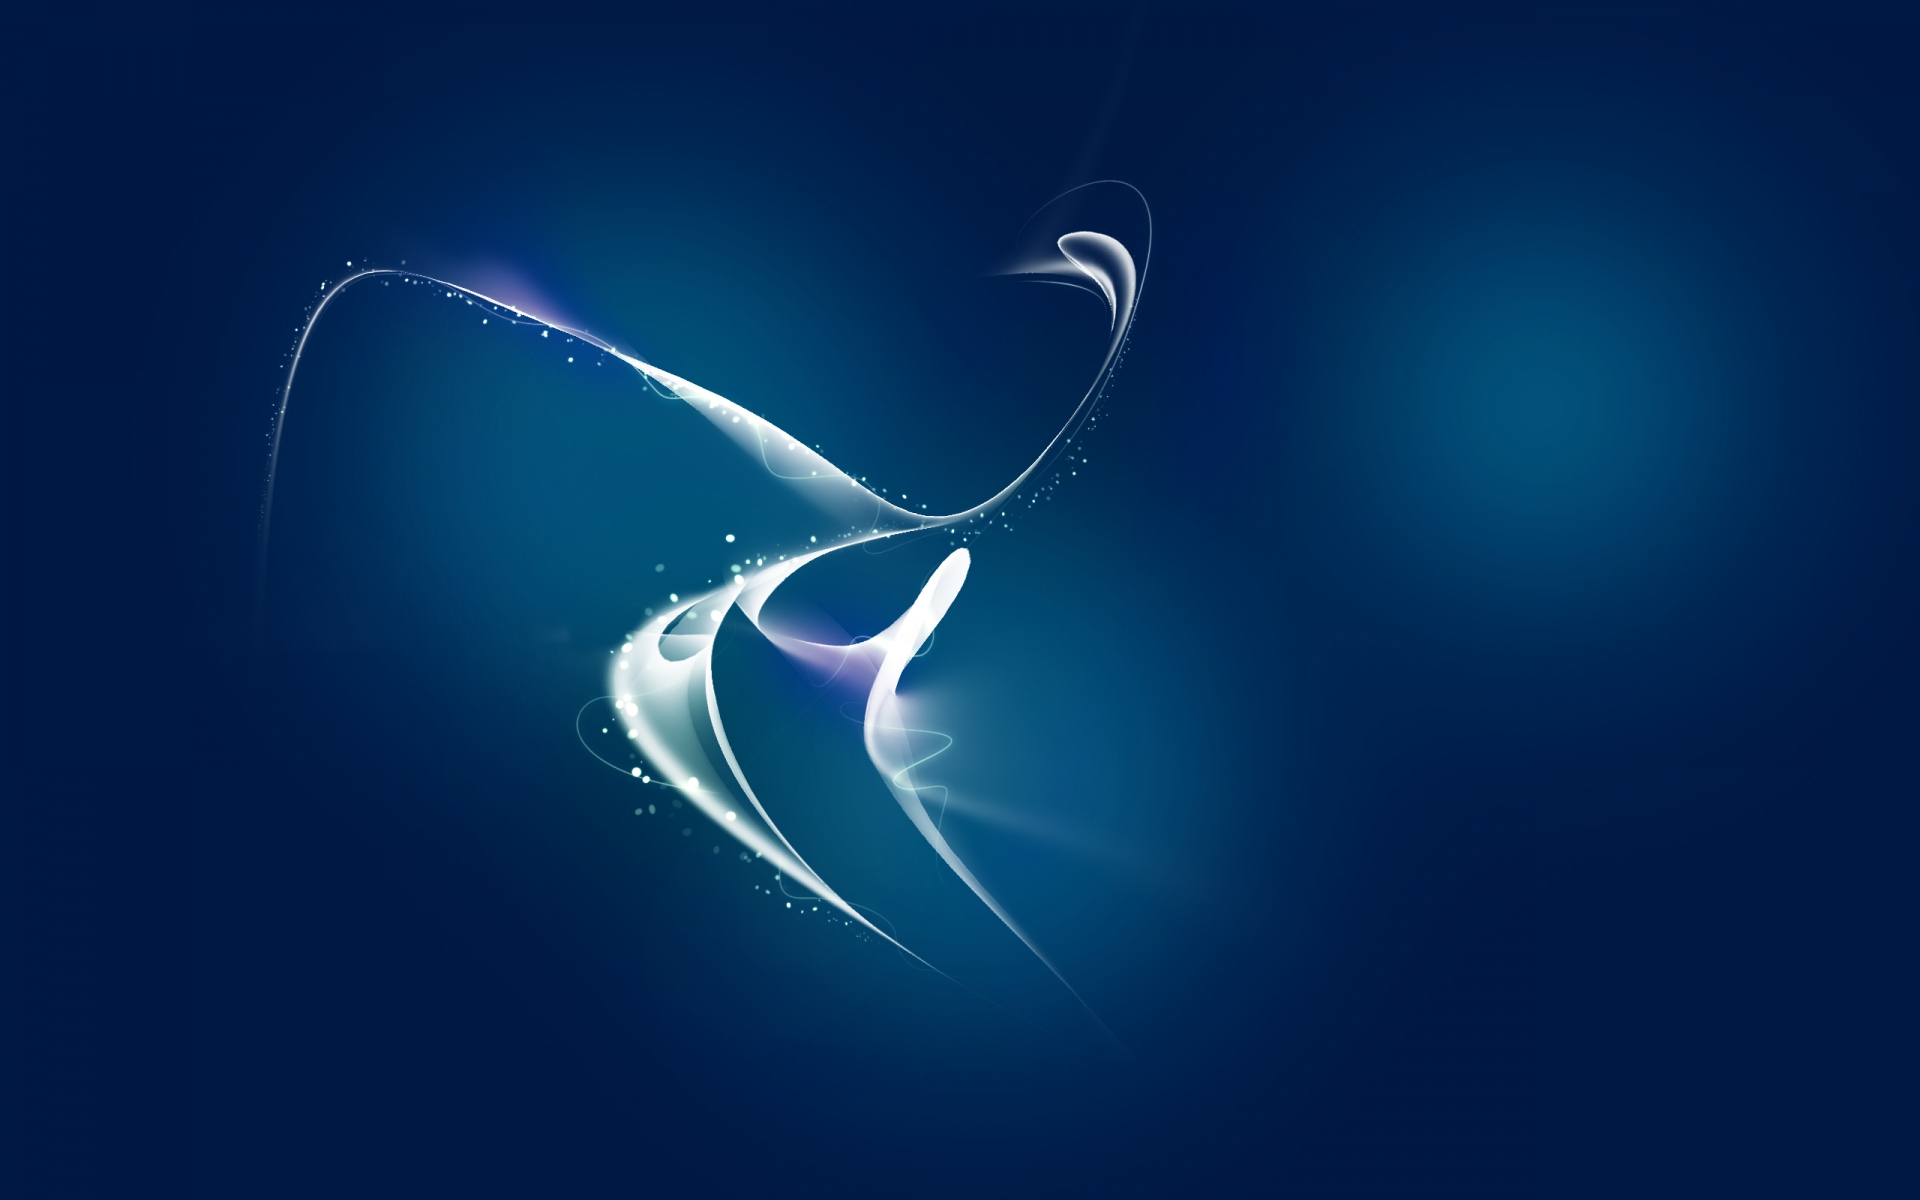 Abstract Design for 1920 x 1200 widescreen resolution